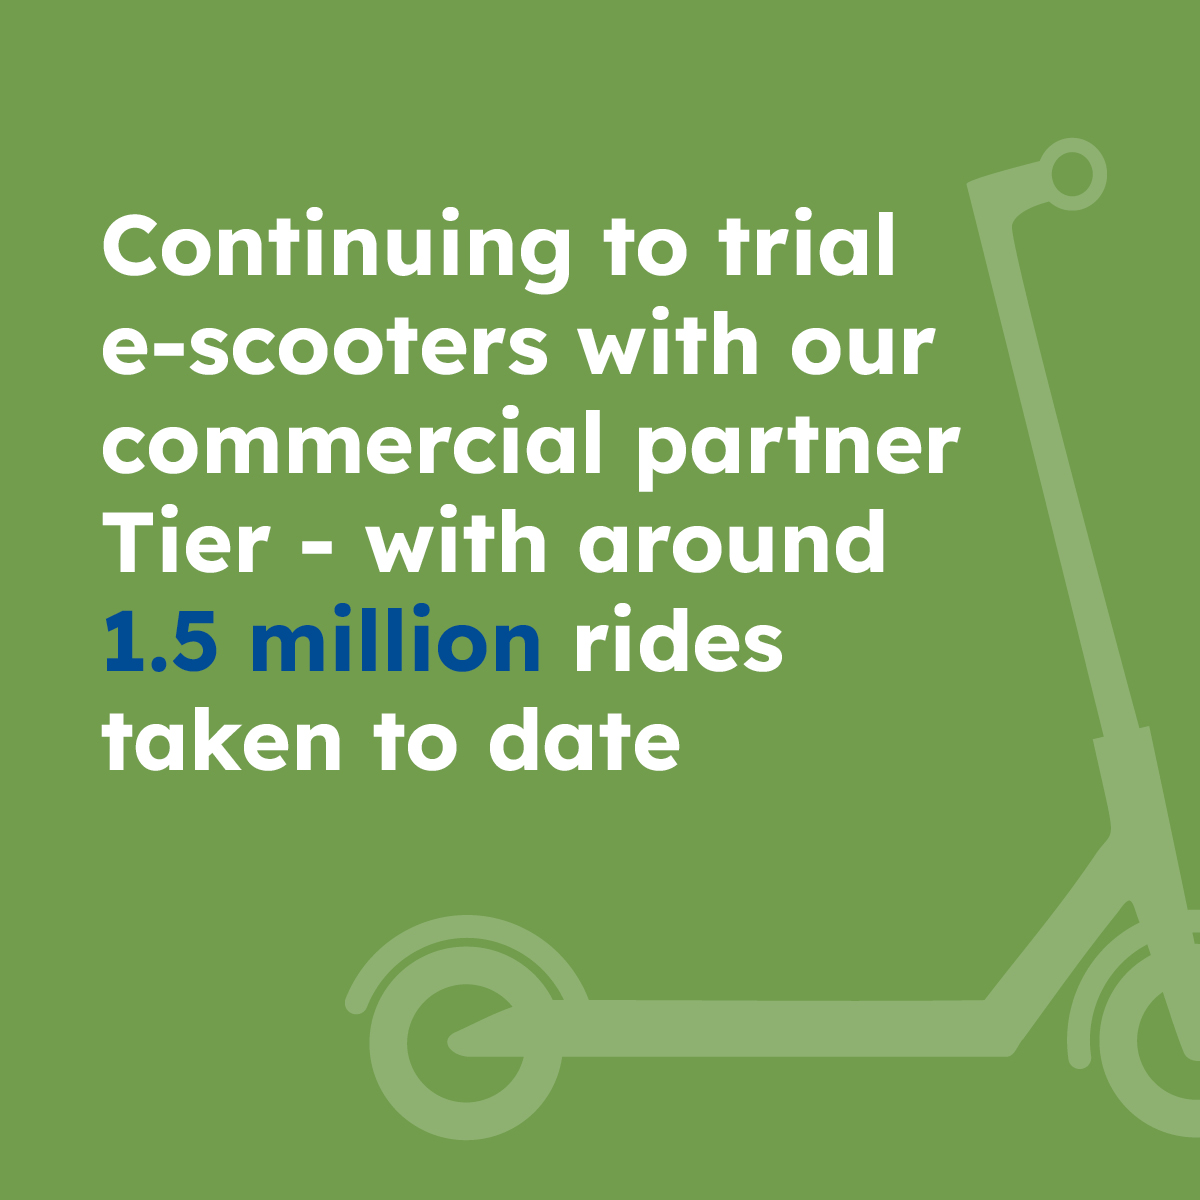 Continuing to trial e-scooters with our commercial partner Tier - with around 1.5 million rides taken to date